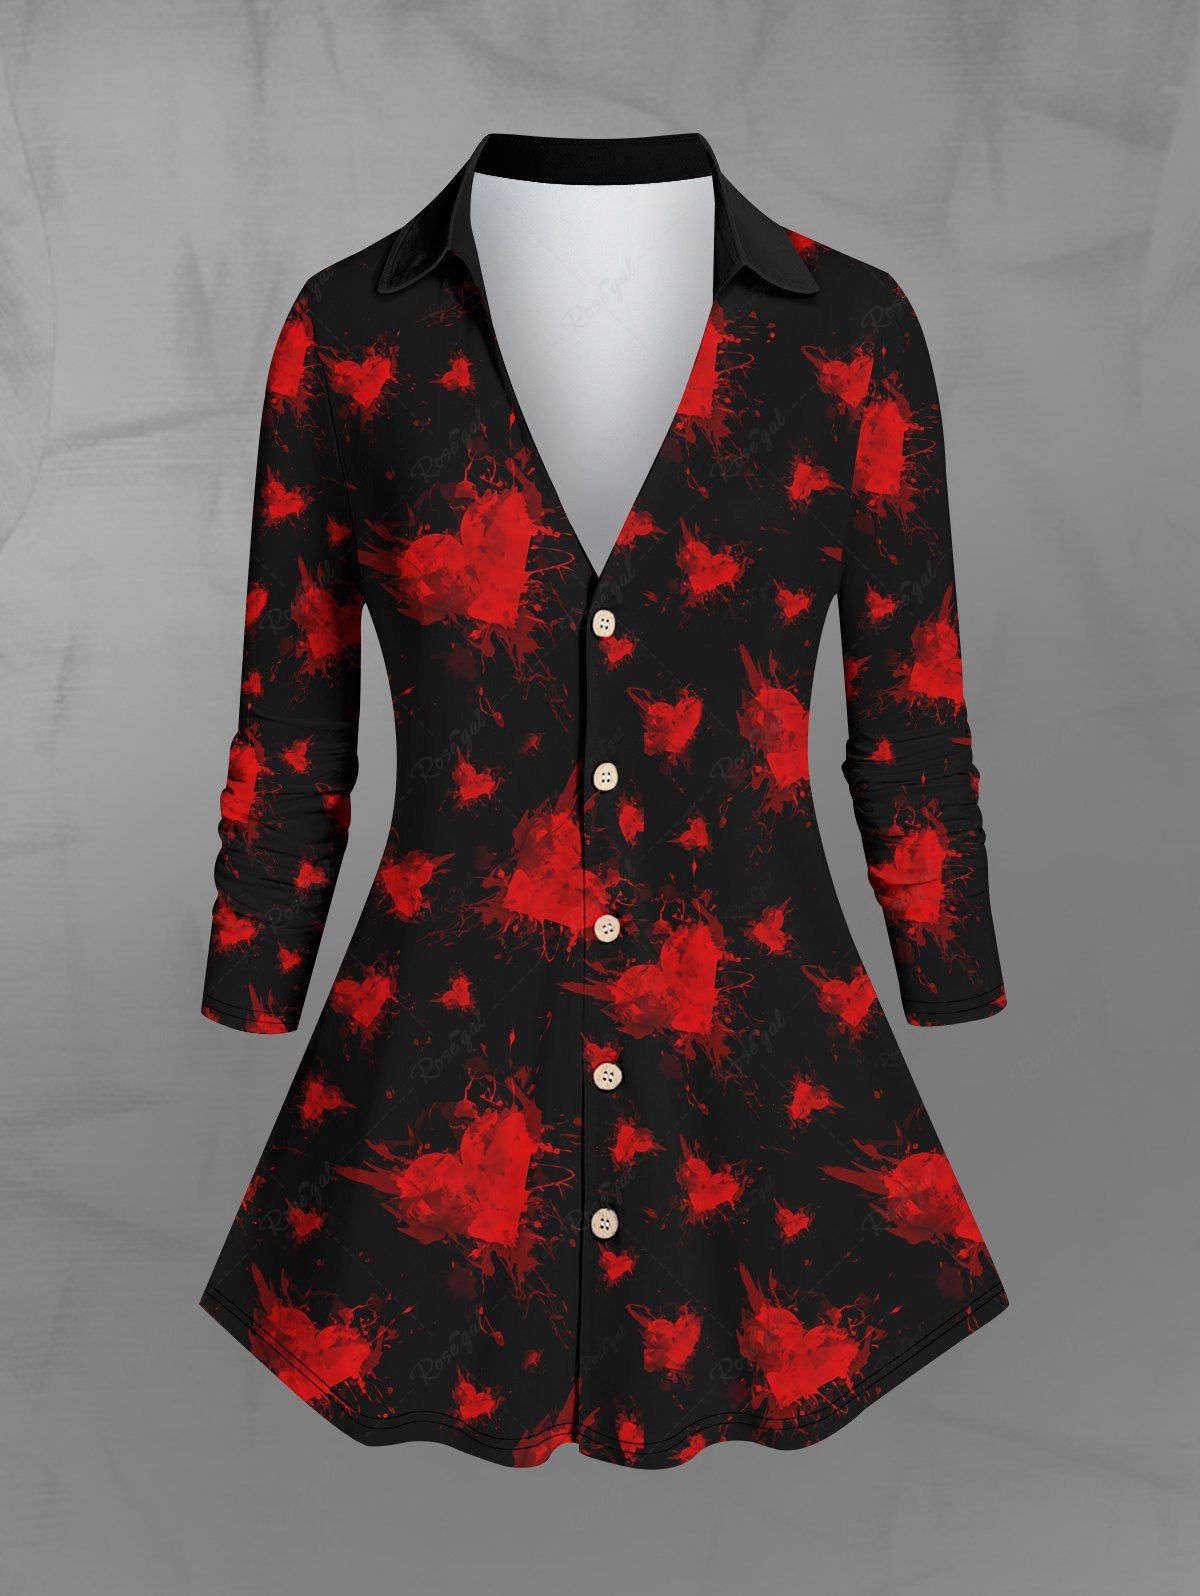 Gothic Turn-down Collar Full Buttons Heart Painting Splatter Watercolor Print Long Sleeves Valentines Shirt